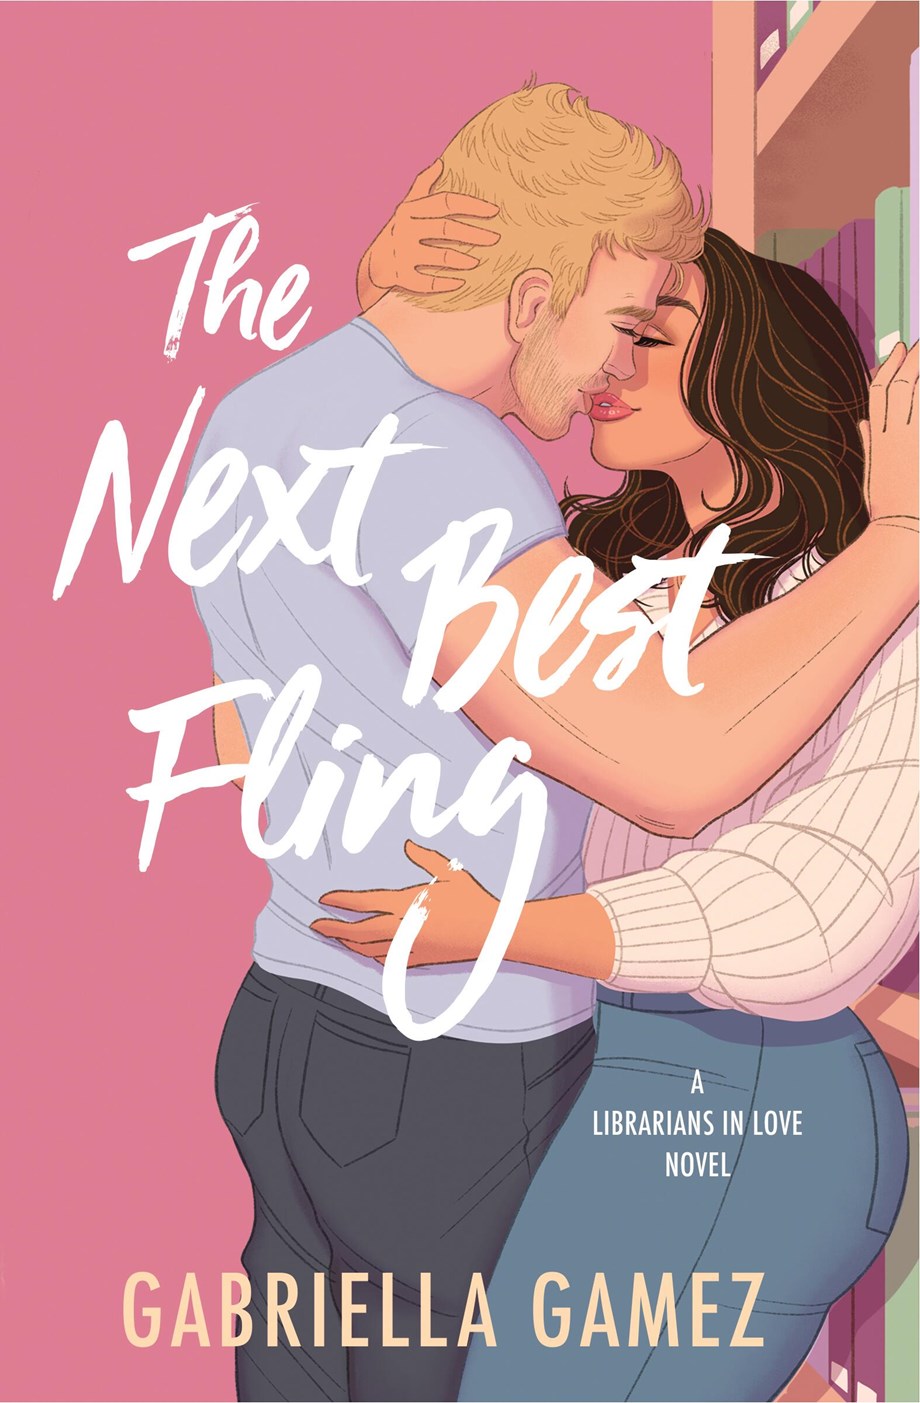 The Next Best Fling by Gabriella Gamez (Paperback) (PREORDER)